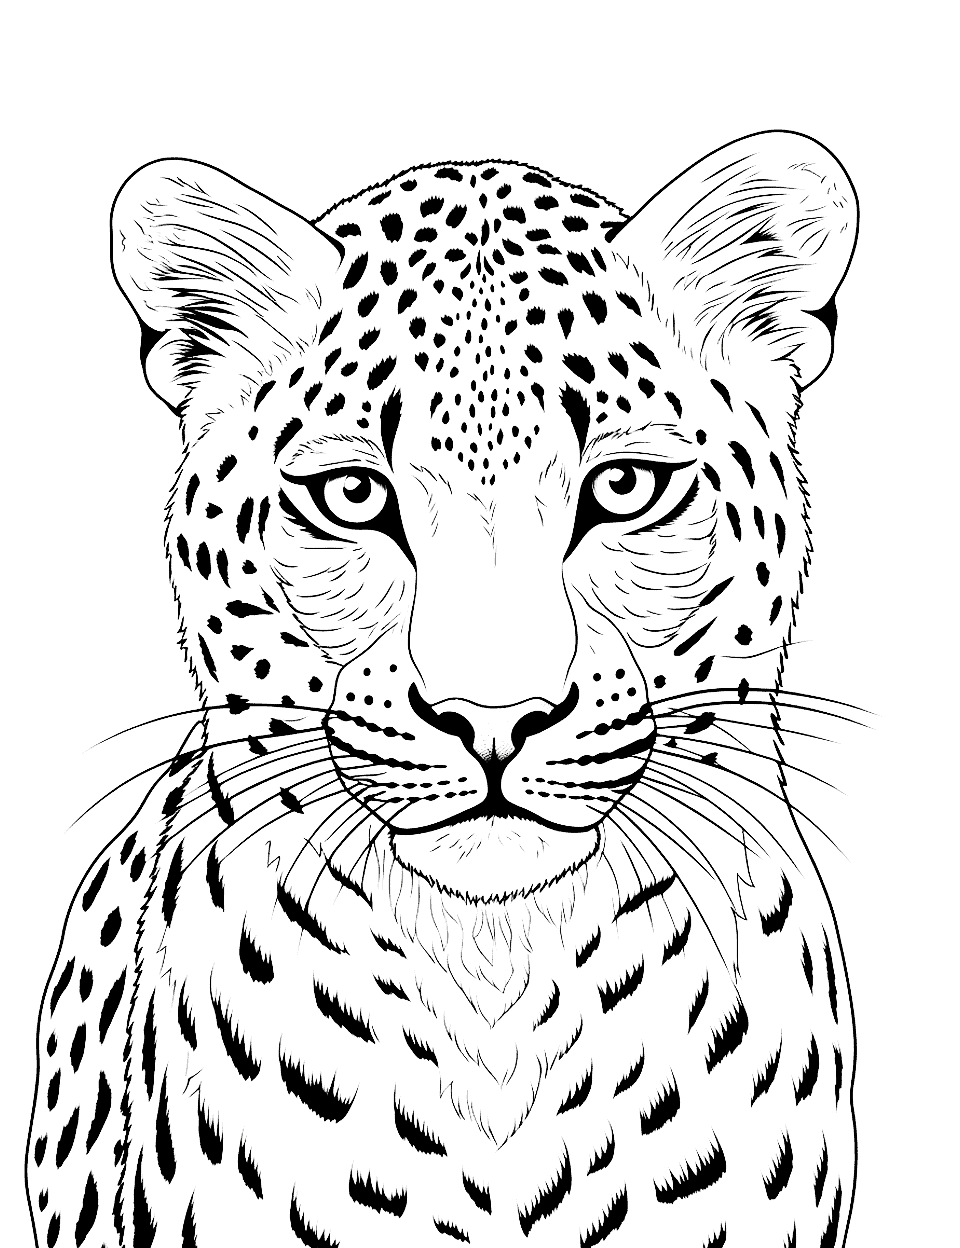 Detailed Cheetah Portrait Coloring Page - A close-up, detailed portrait of a cheetah’s face, suitable for older kids and adults.